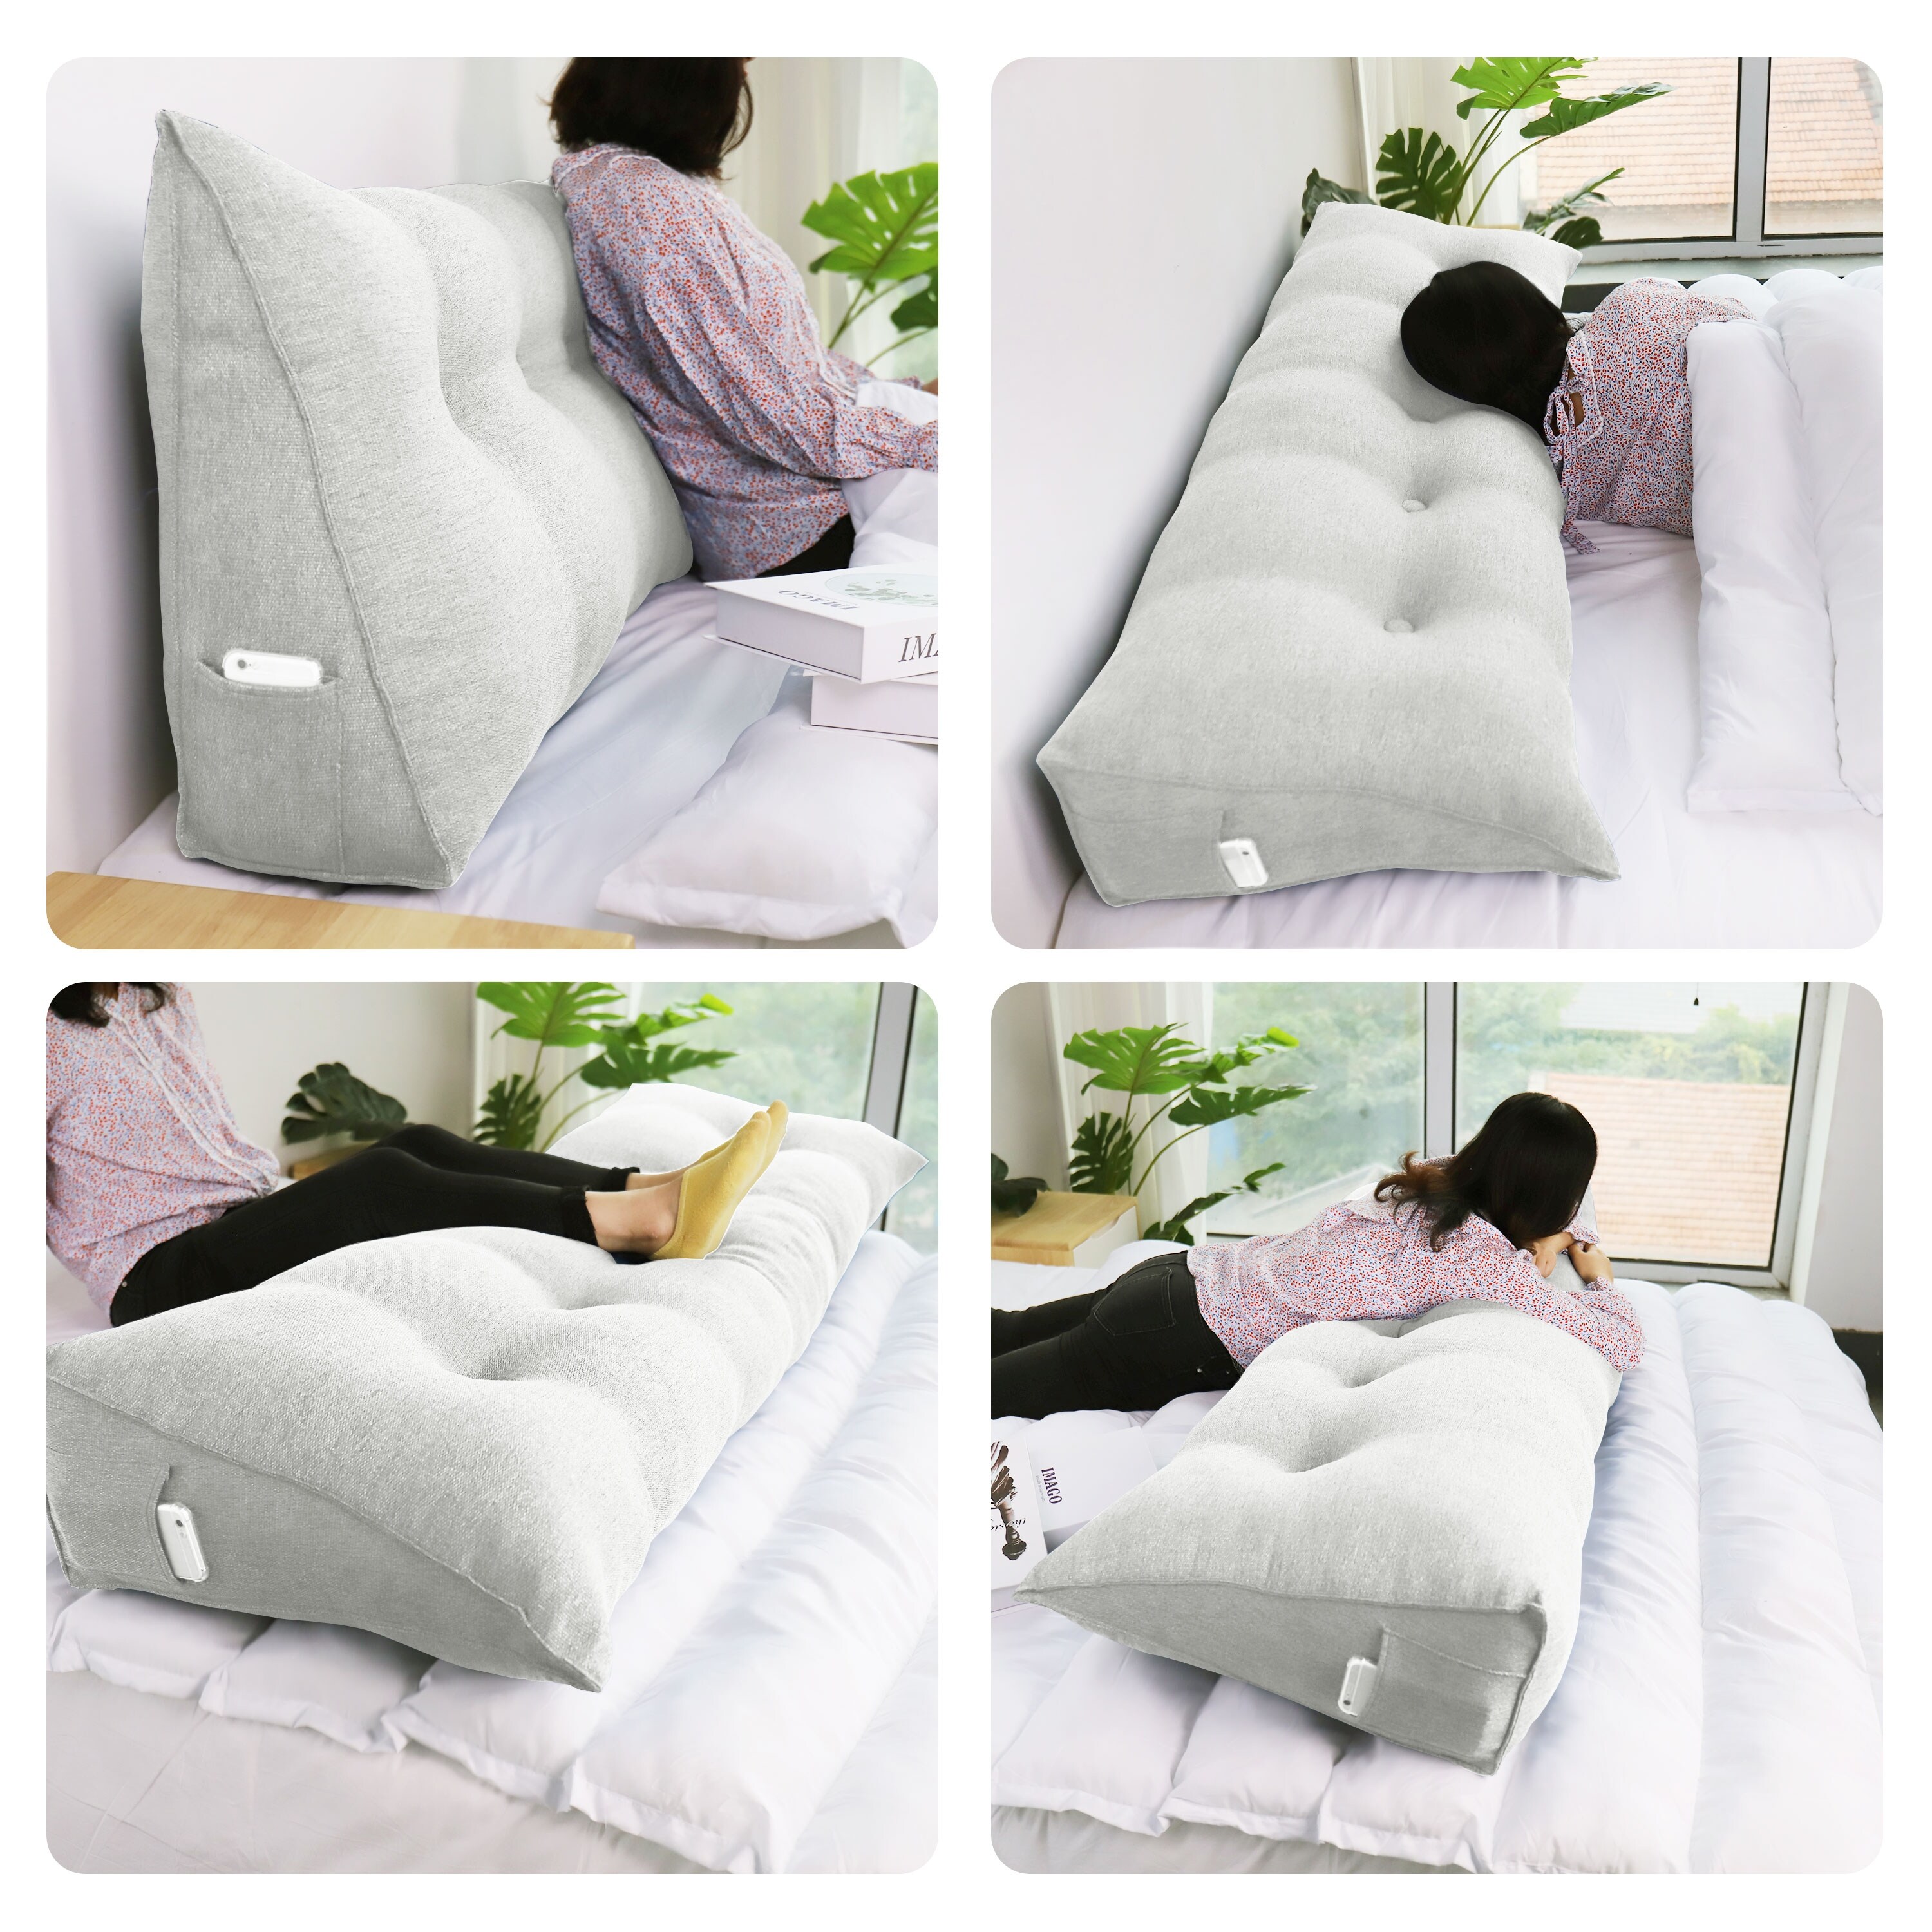 https://ak1.ostkcdn.com/images/products/is/images/direct/f388fa9f4bb98830fbdb64c0eb9e3b767911e1aa/WOWMAX-Bed-Wedge-Pillow-Bolster-Large-Backrest-Support-Off-White-Full-Size.jpg